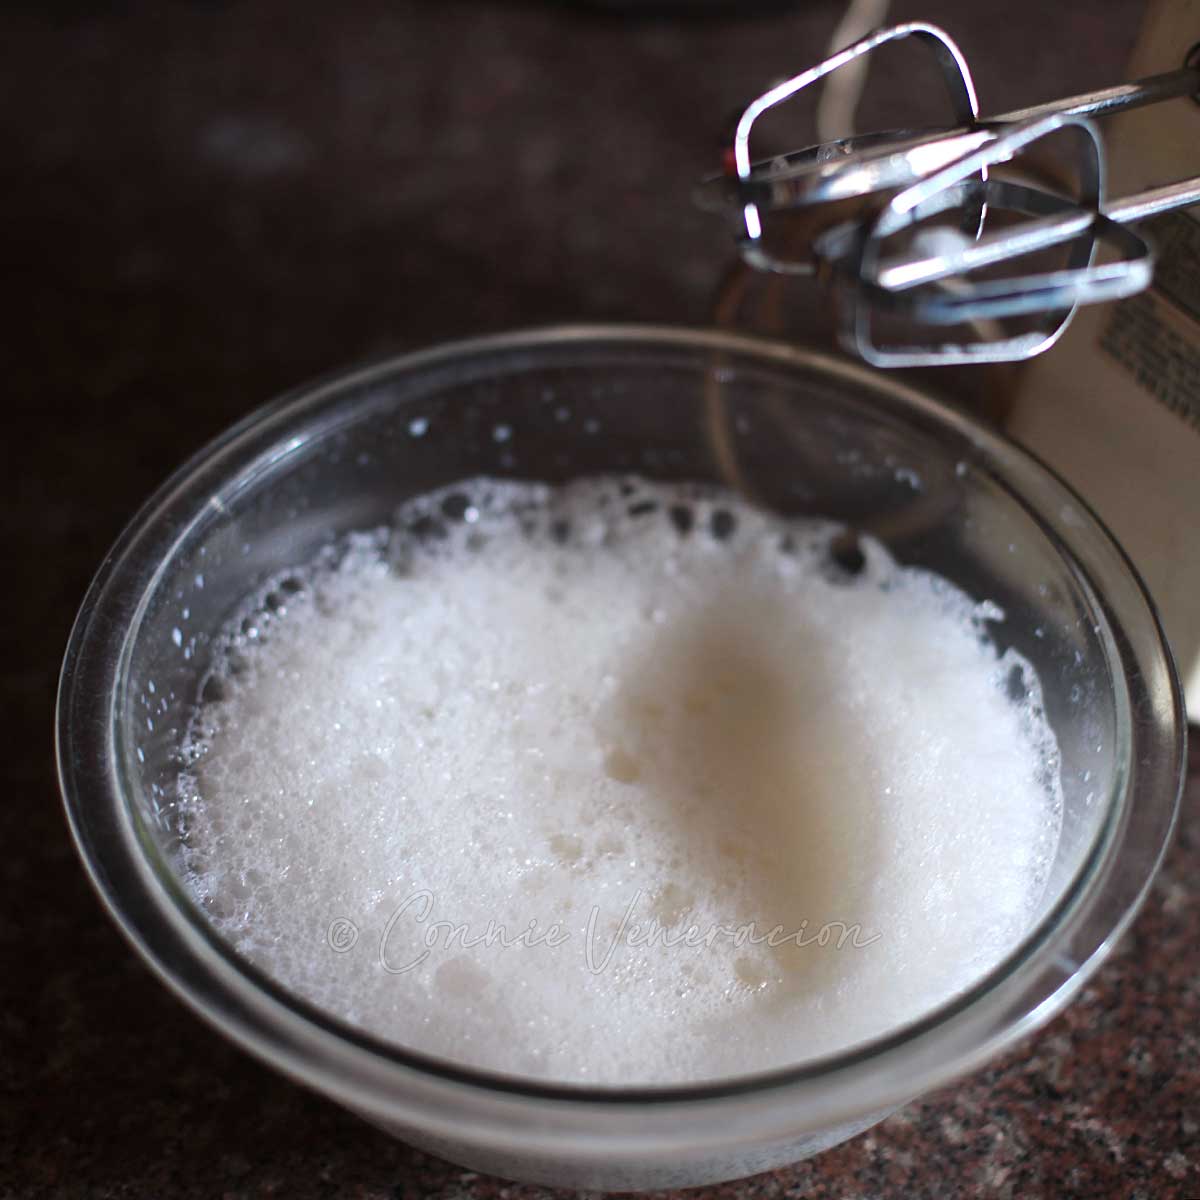 Whipping hot milk to create froth